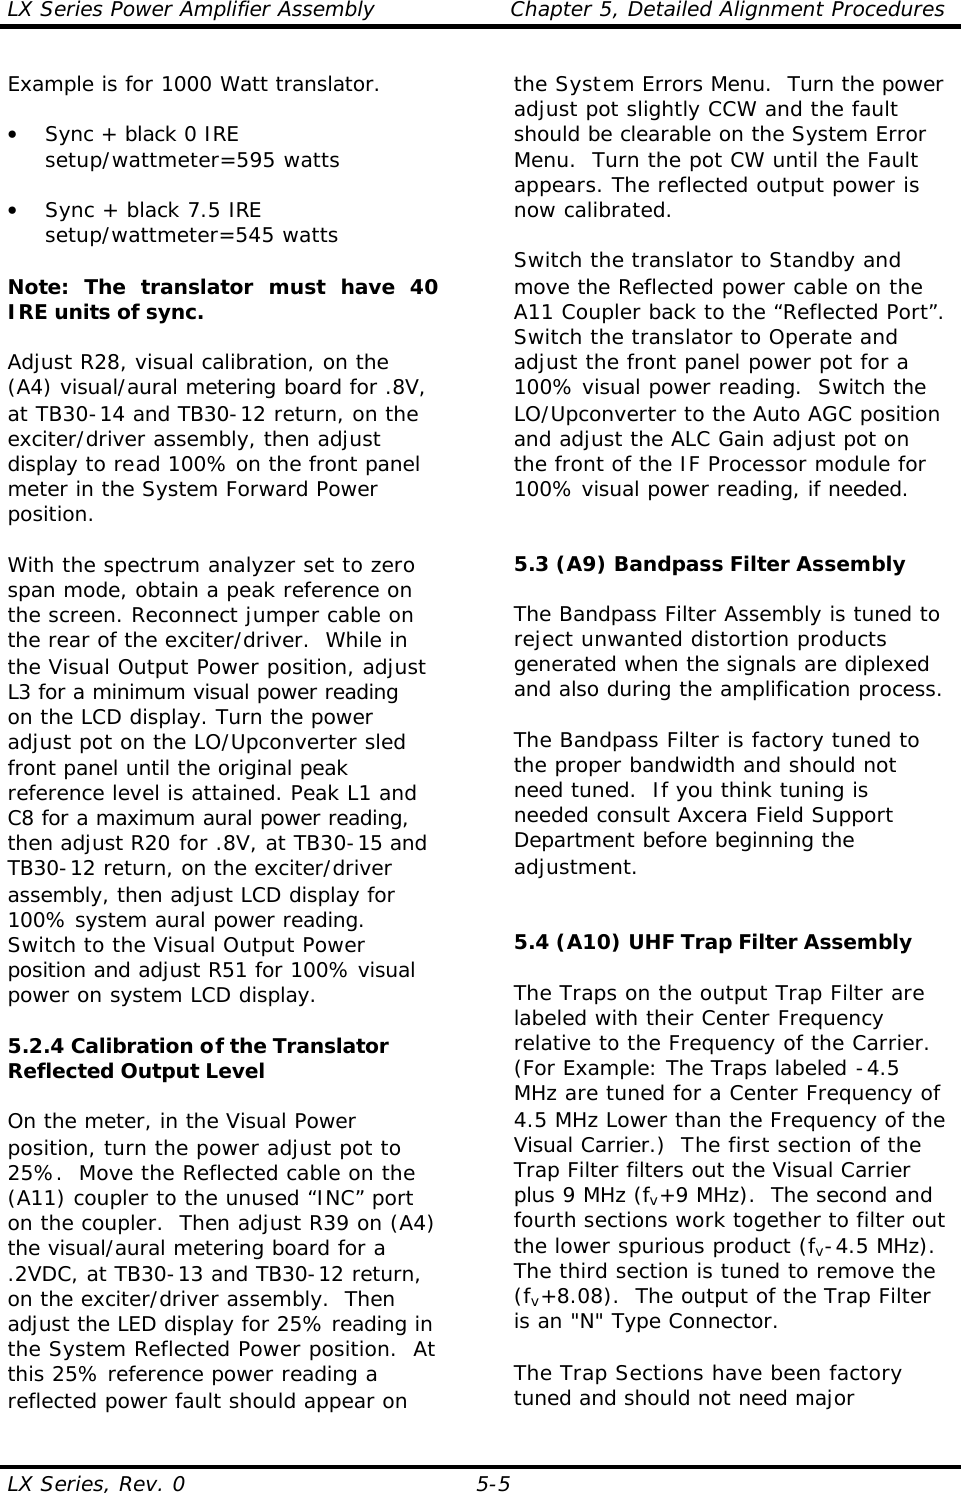 LX Series Power Amplifier Assembly Chapter 5, Detailed Alignment Procedures  LX Series, Rev. 0 5-5 Example is for 1000 Watt translator.  • Sync + black 0 IRE setup/wattmeter=595 watts  • Sync + black 7.5 IRE setup/wattmeter=545 watts    Note: The translator must have 40 IRE units of sync.   Adjust R28, visual calibration, on the (A4) visual/aural metering board for .8V, at TB30-14 and TB30-12 return, on the exciter/driver assembly, then adjust display to read 100% on the front panel meter in the System Forward Power position.  With the spectrum analyzer set to zero span mode, obtain a peak reference on the screen. Reconnect jumper cable on the rear of the exciter/driver.  While in the Visual Output Power position, adjust L3 for a minimum visual power reading on the LCD display. Turn the power adjust pot on the LO/Upconverter sled front panel until the original peak reference level is attained. Peak L1 and C8 for a maximum aural power reading, then adjust R20 for .8V, at TB30-15 and TB30-12 return, on the exciter/driver assembly, then adjust LCD display for 100% system aural power reading. Switch to the Visual Output Power position and adjust R51 for 100% visual power on system LCD display.  5.2.4 Calibration of the Translator Reflected Output Level   On the meter, in the Visual Power position, turn the power adjust pot to 25%.  Move the Reflected cable on the (A11) coupler to the unused “INC” port on the coupler.  Then adjust R39 on (A4) the visual/aural metering board for a .2VDC, at TB30-13 and TB30-12 return, on the exciter/driver assembly.  Then adjust the LED display for 25% reading in the System Reflected Power position.  At this 25% reference power reading a reflected power fault should appear on the System Errors Menu.  Turn the power adjust pot slightly CCW and the fault should be clearable on the System Error Menu.  Turn the pot CW until the Fault appears. The reflected output power is now calibrated.    Switch the translator to Standby and move the Reflected power cable on the A11 Coupler back to the “Reflected Port”. Switch the translator to Operate and adjust the front panel power pot for a 100% visual power reading.  Switch the LO/Upconverter to the Auto AGC position and adjust the ALC Gain adjust pot on the front of the IF Processor module for 100% visual power reading, if needed.   5.3 (A9) Bandpass Filter Assembly   The Bandpass Filter Assembly is tuned to reject unwanted distortion products generated when the signals are diplexed and also during the amplification process.  The Bandpass Filter is factory tuned to the proper bandwidth and should not need tuned.  If you think tuning is needed consult Axcera Field Support Department before beginning the adjustment.   5.4 (A10) UHF Trap Filter Assembly  The Traps on the output Trap Filter are labeled with their Center Frequency relative to the Frequency of the Carrier.  (For Example: The Traps labeled -4.5 MHz are tuned for a Center Frequency of 4.5 MHz Lower than the Frequency of the Visual Carrier.)  The first section of the Trap Filter filters out the Visual Carrier plus 9 MHz (fv+9 MHz).  The second and fourth sections work together to filter out the lower spurious product (fv-4.5 MHz).  The third section is tuned to remove the (fv+8.08).  The output of the Trap Filter is an &quot;N&quot; Type Connector.  The Trap Sections have been factory tuned and should not need major 